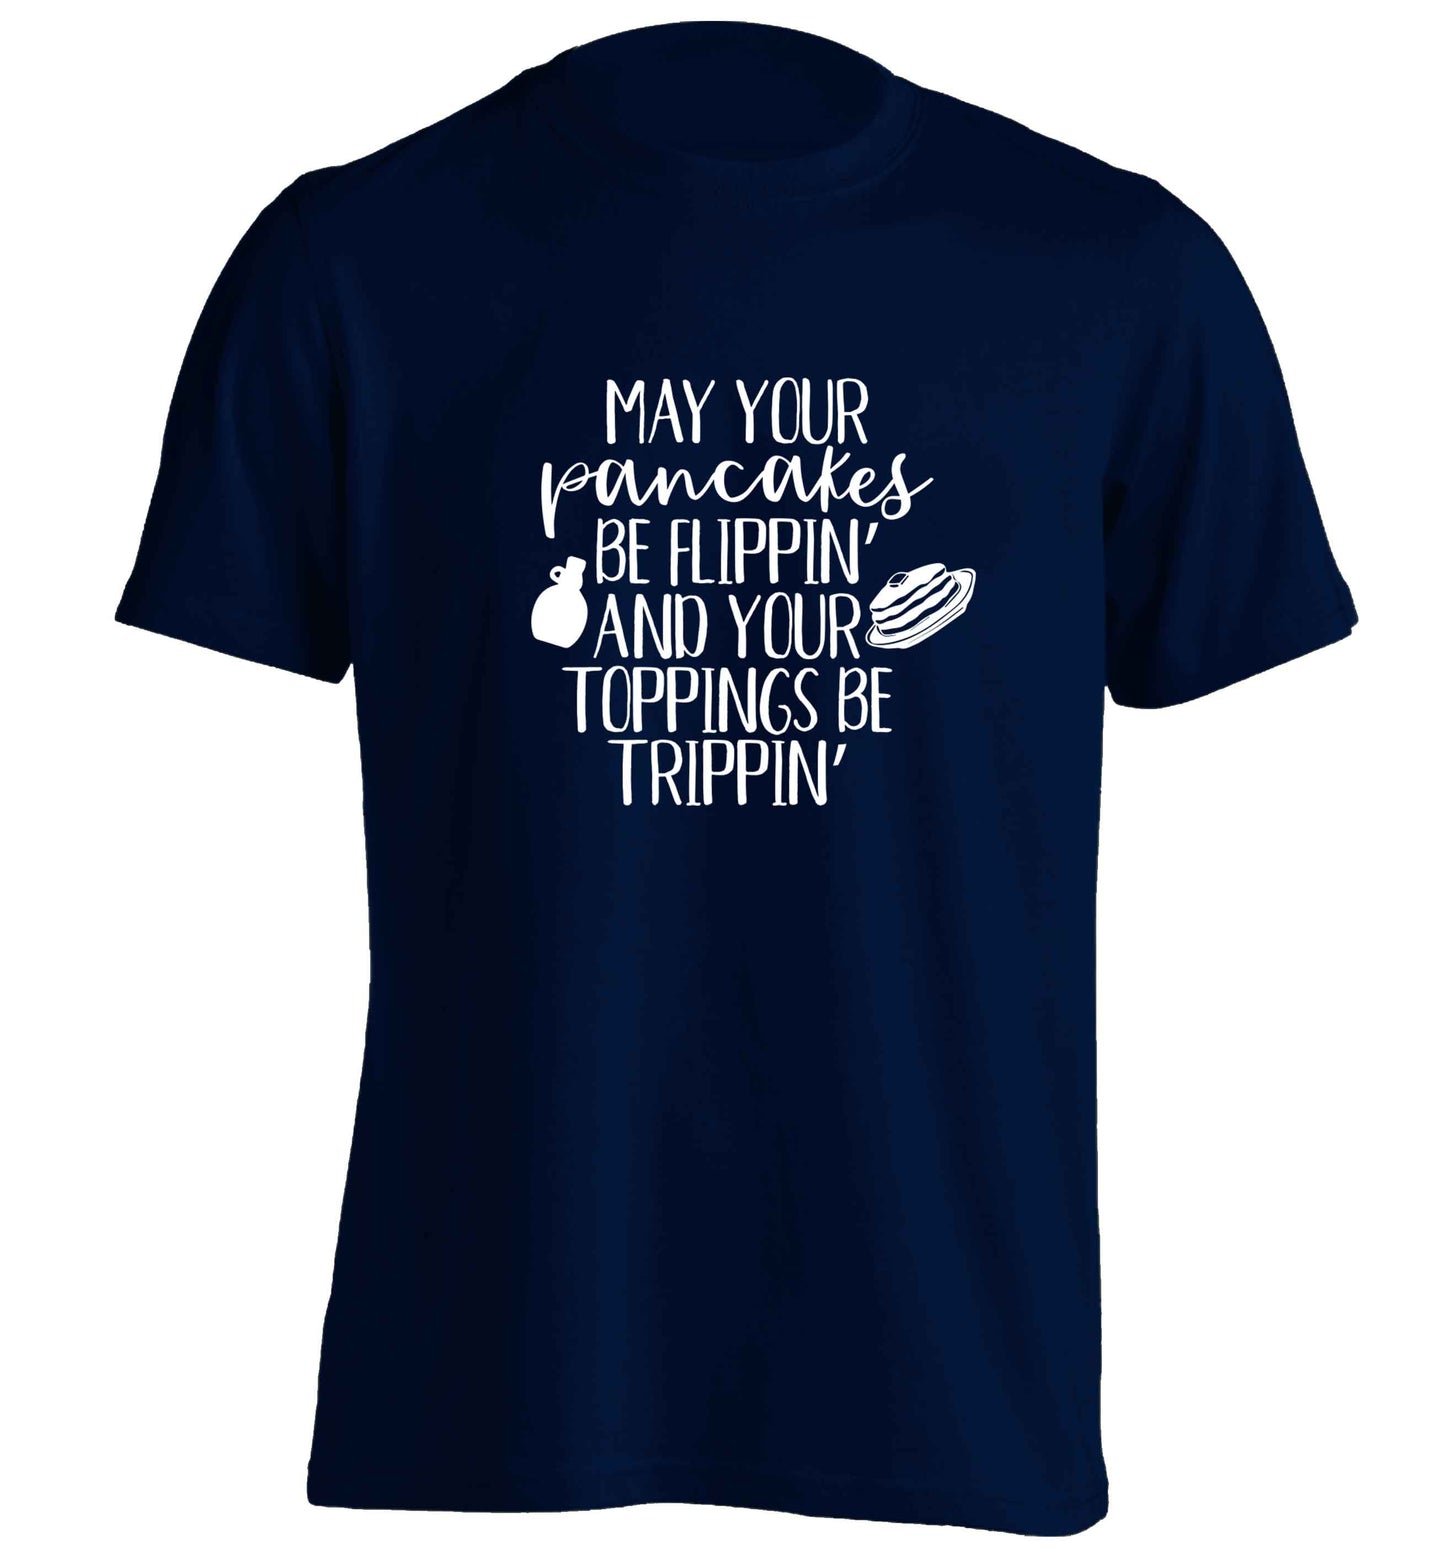 May your pancakes be flippin' and your toppings be trippin' adults unisex navy Tshirt 2XL